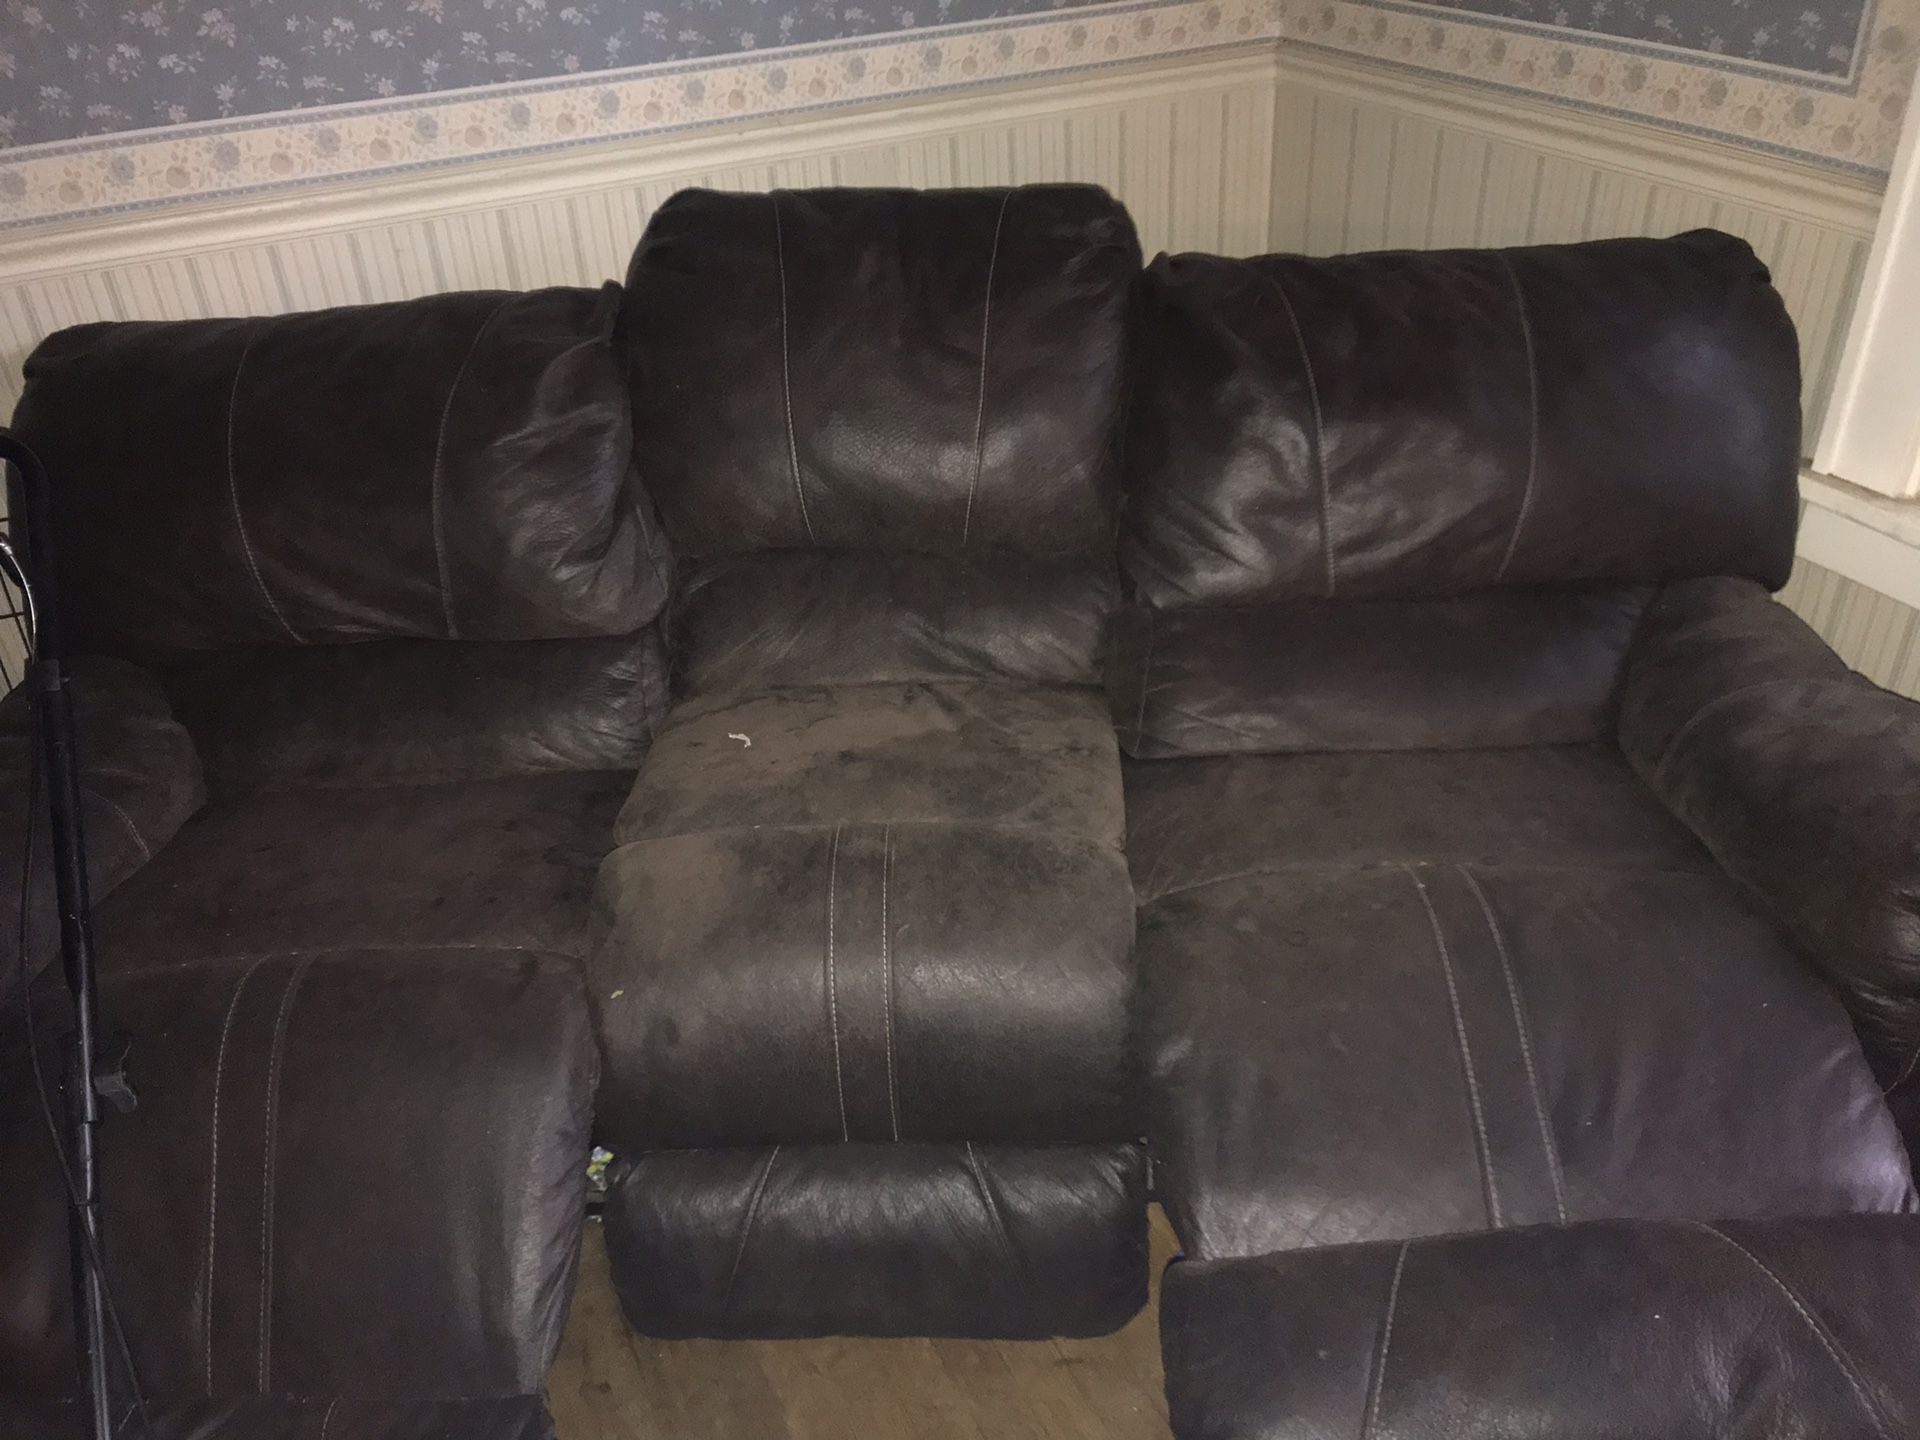 Includes two recliners, couch and end tables